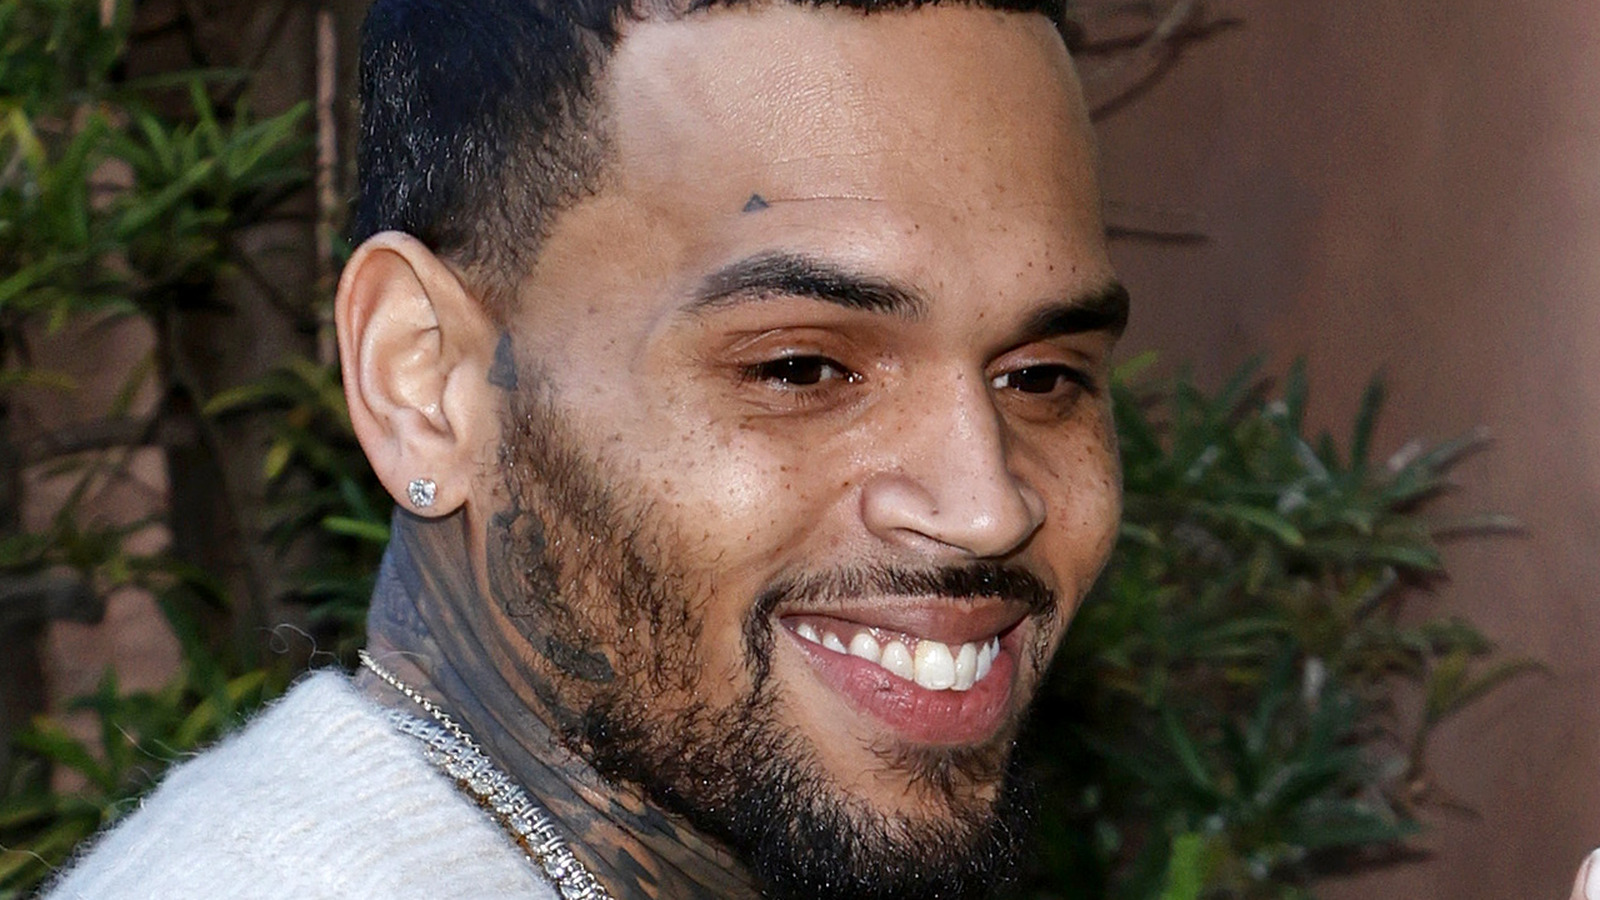 Chris Brown's Tattoos: A Complete Guide